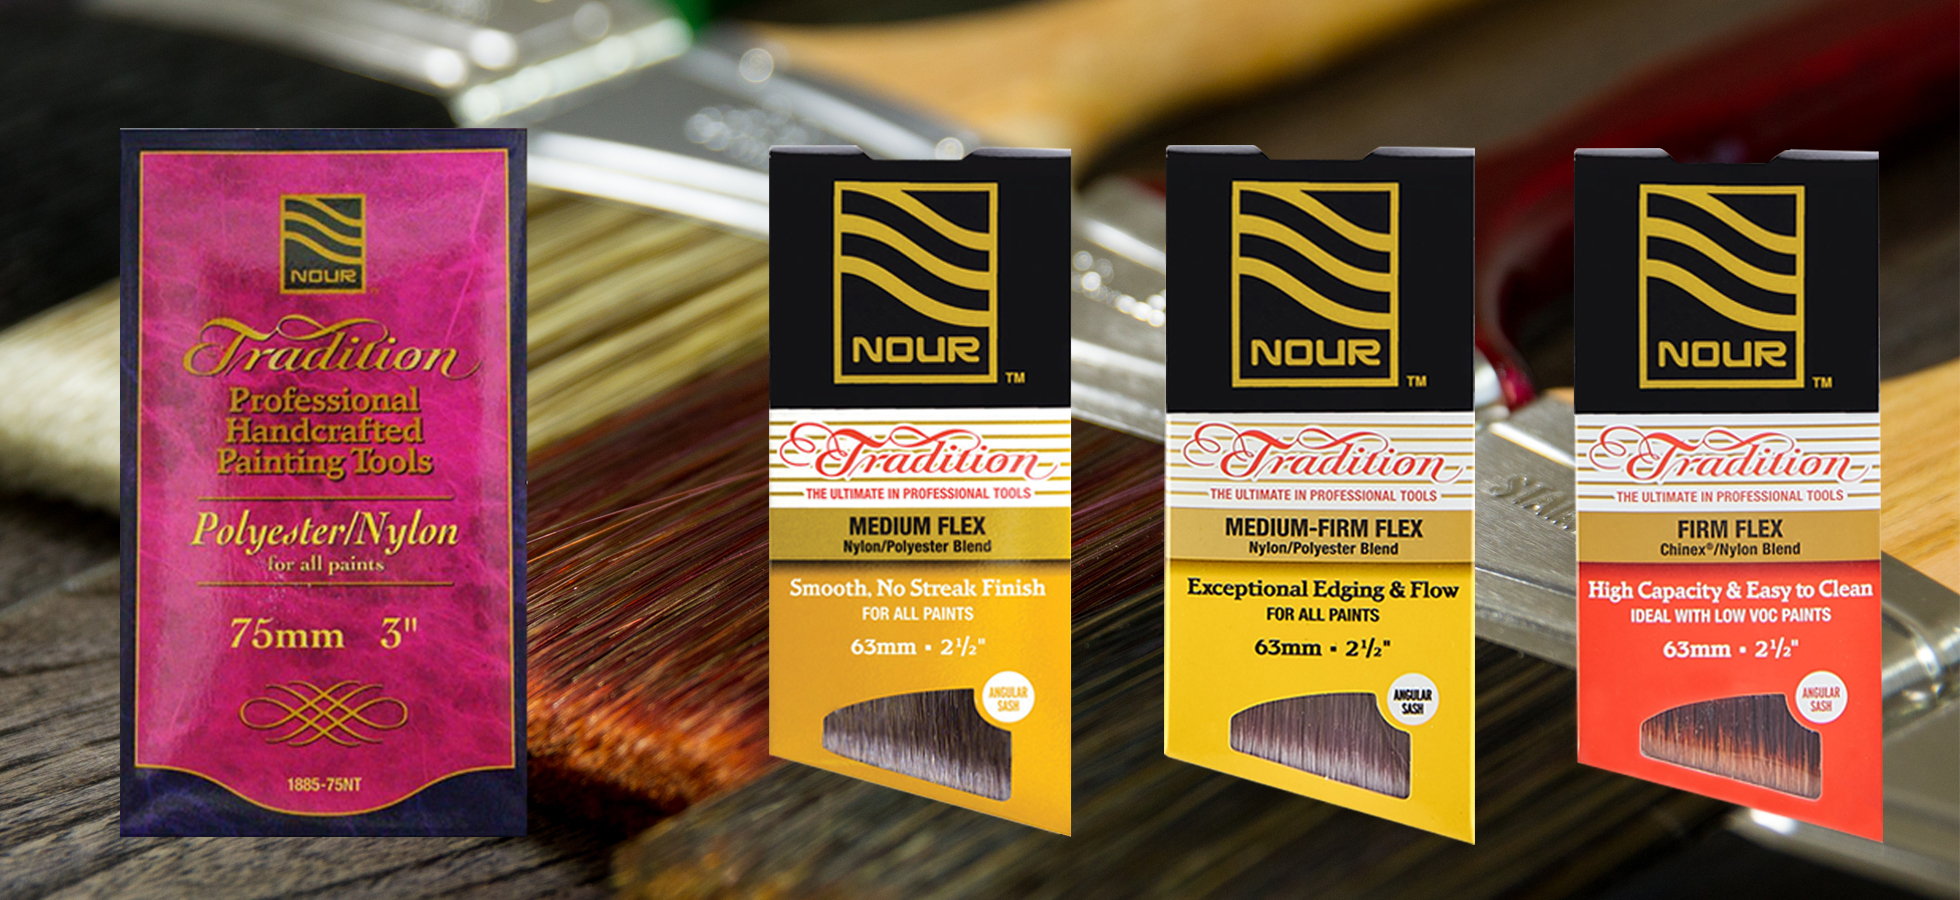 Nour Tradition Line Packaging